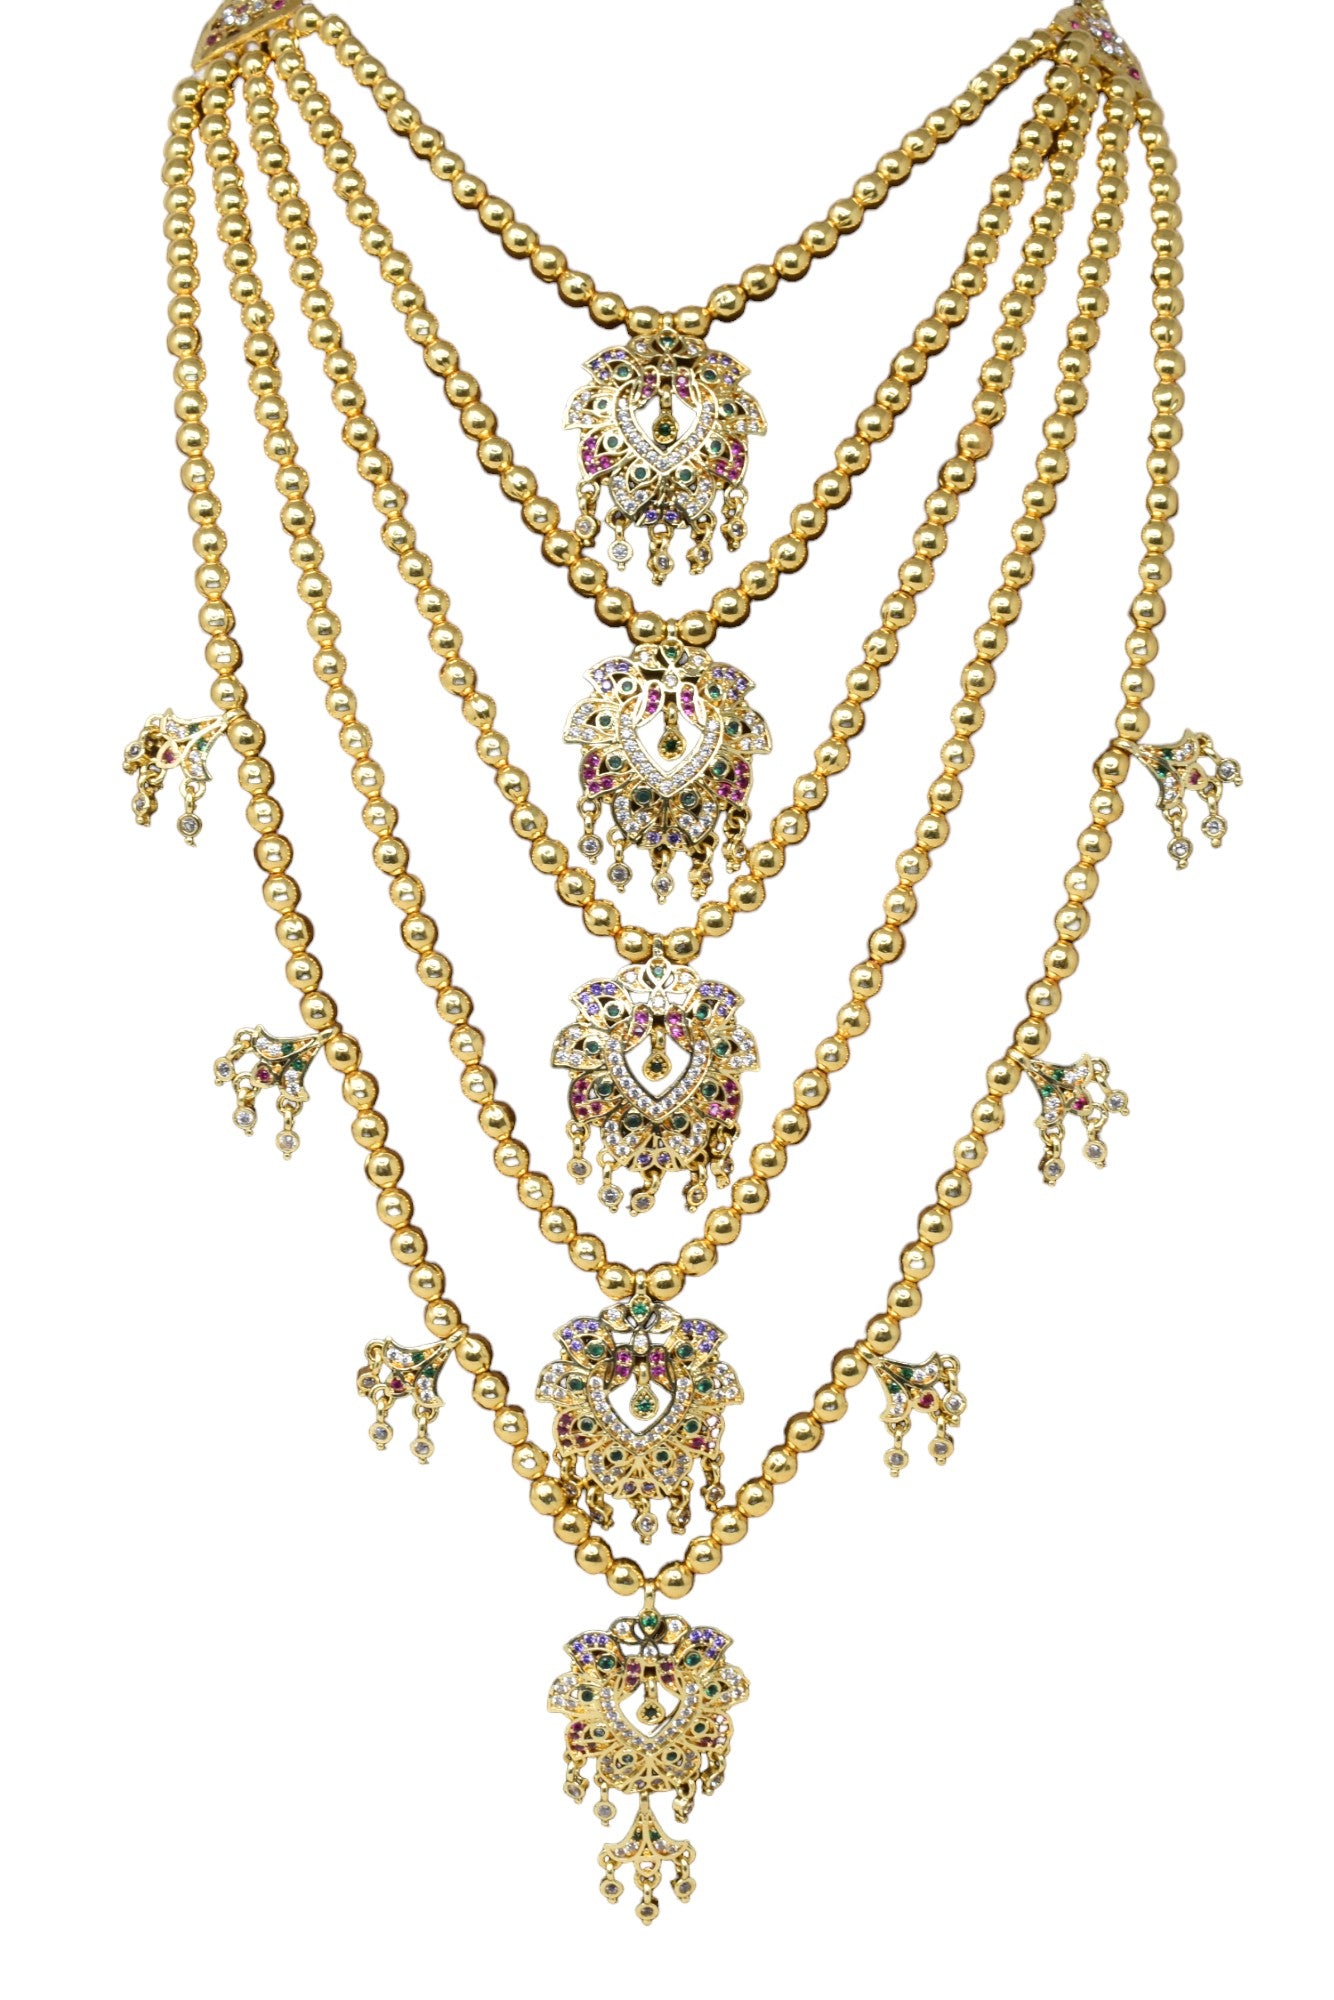 AD Dohari Traditional Necklace Micro Gold 1 Gram Plated